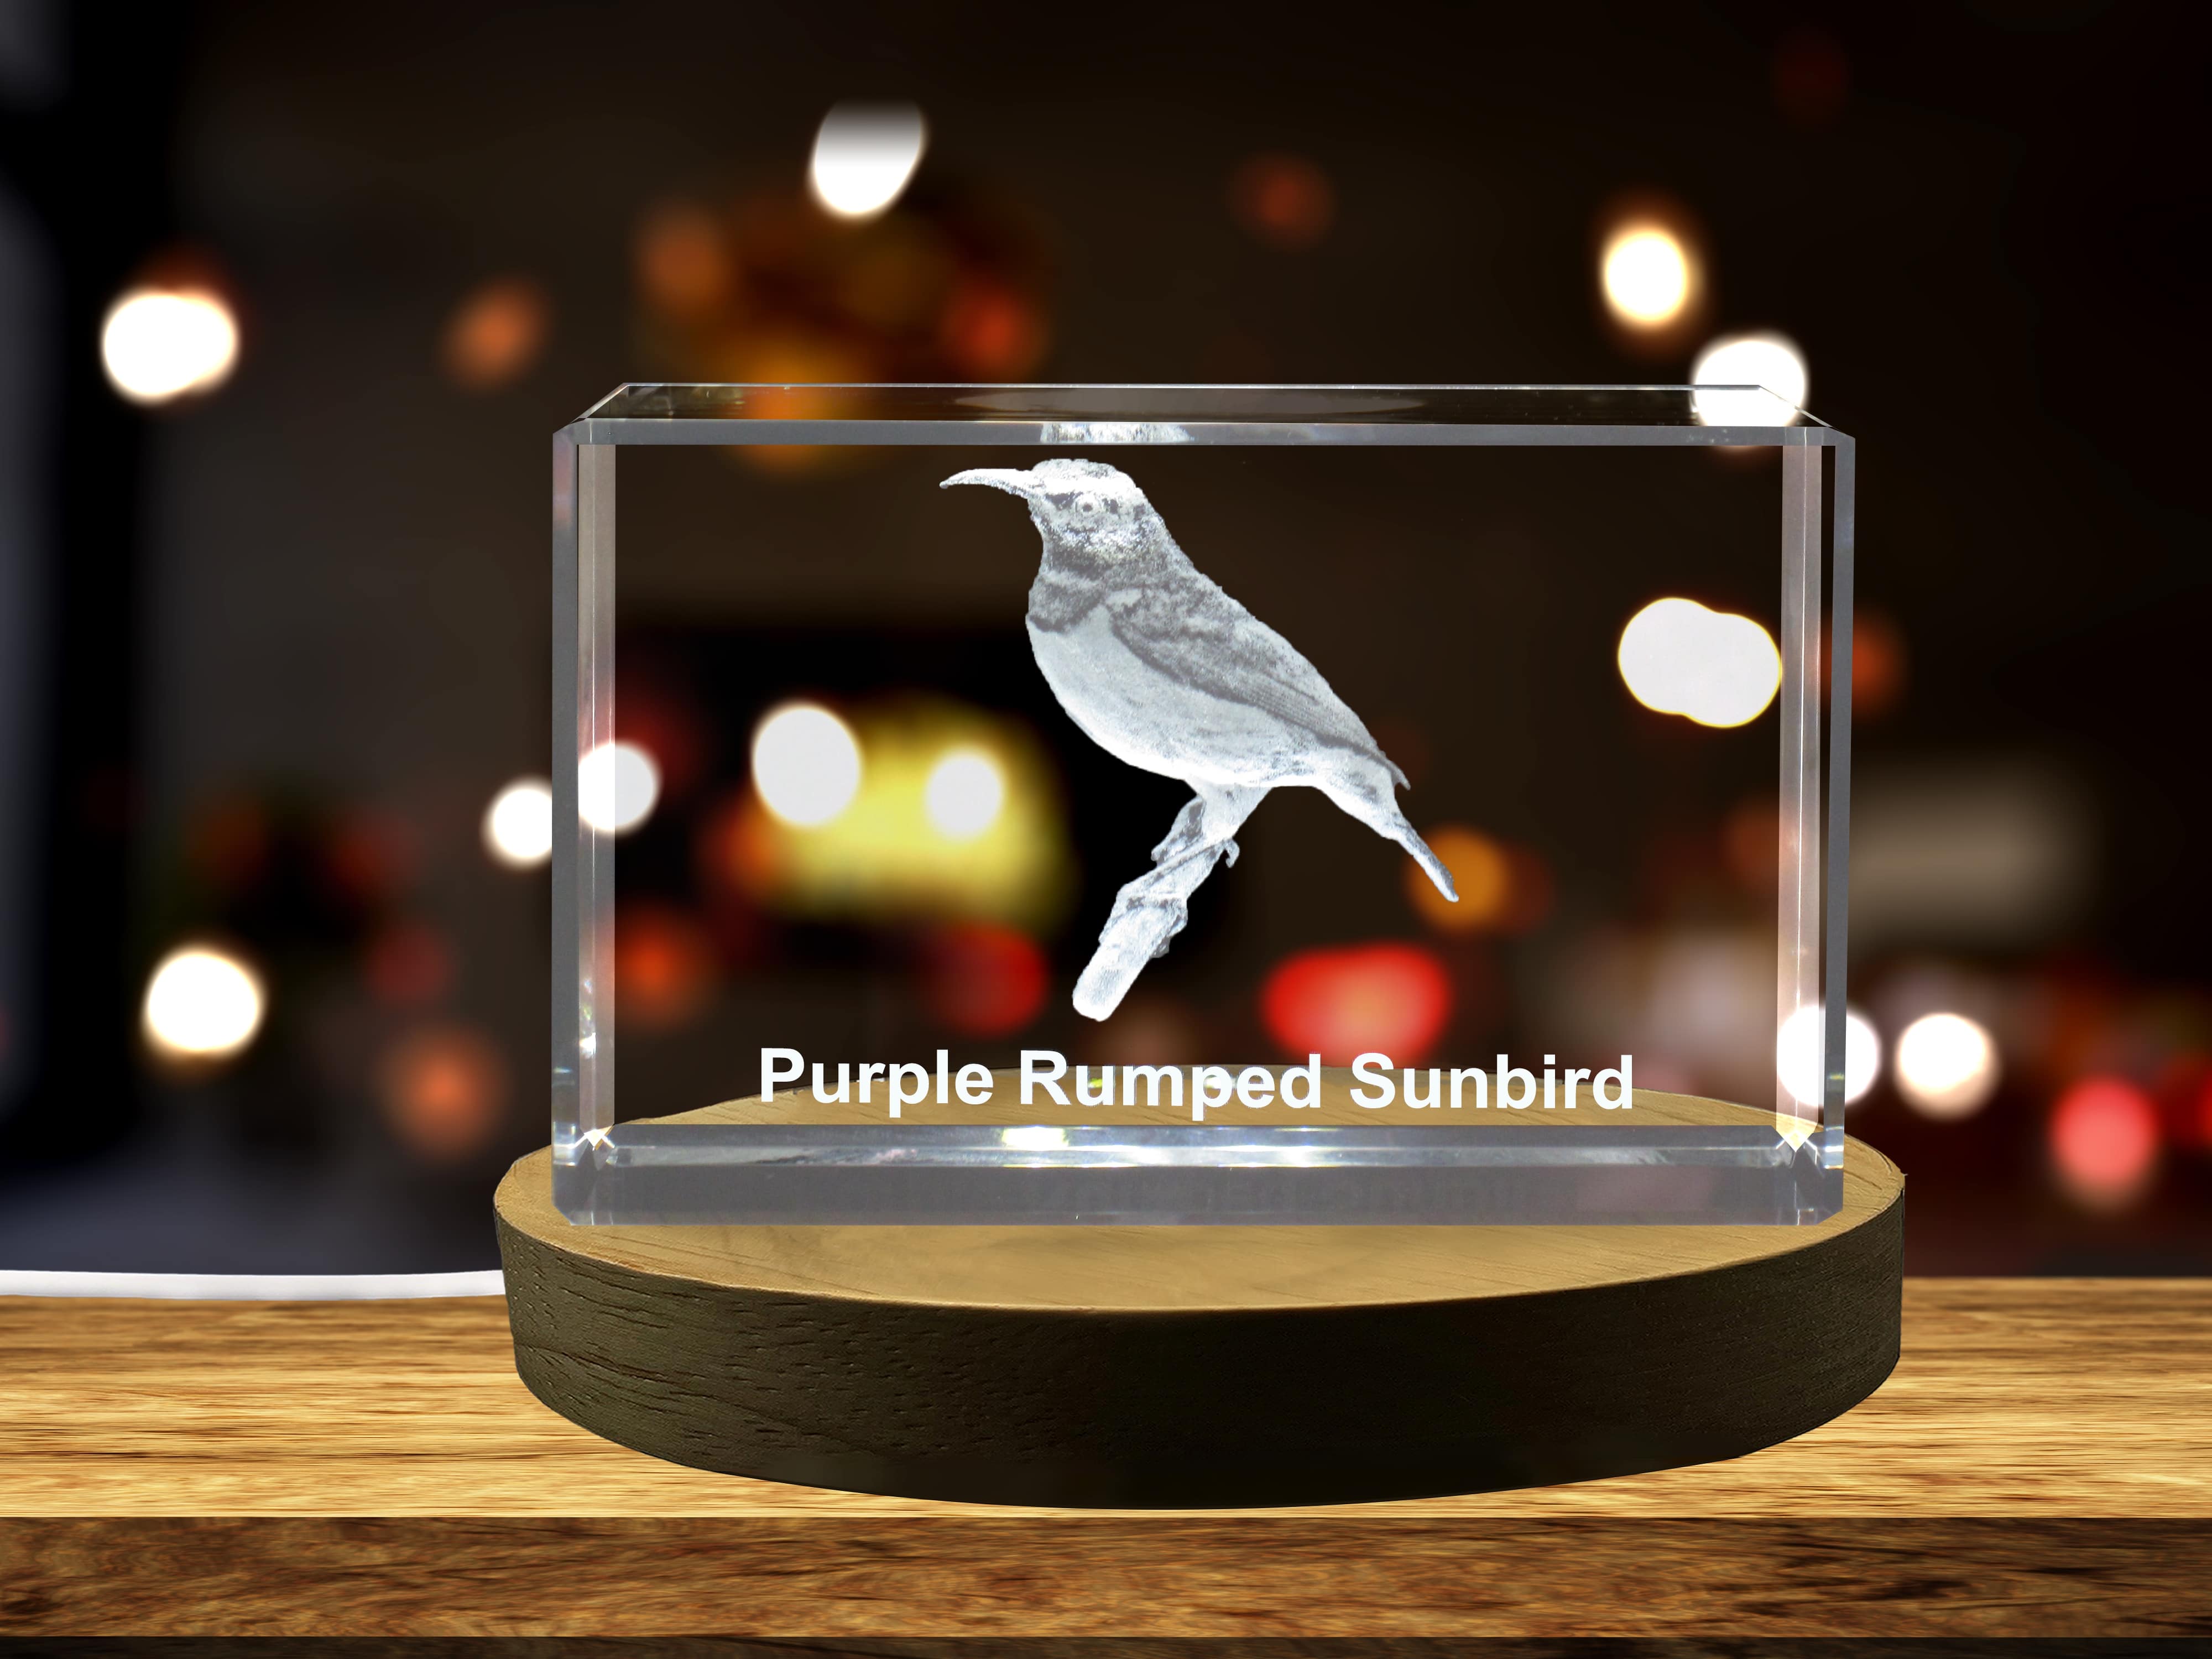 Purple-Rumped Sunbird 3D Engraved Crystal 3D Engraved Crystal Keepsake/Gift/Decor/Collectible/Souvenir A&B Crystal Collection